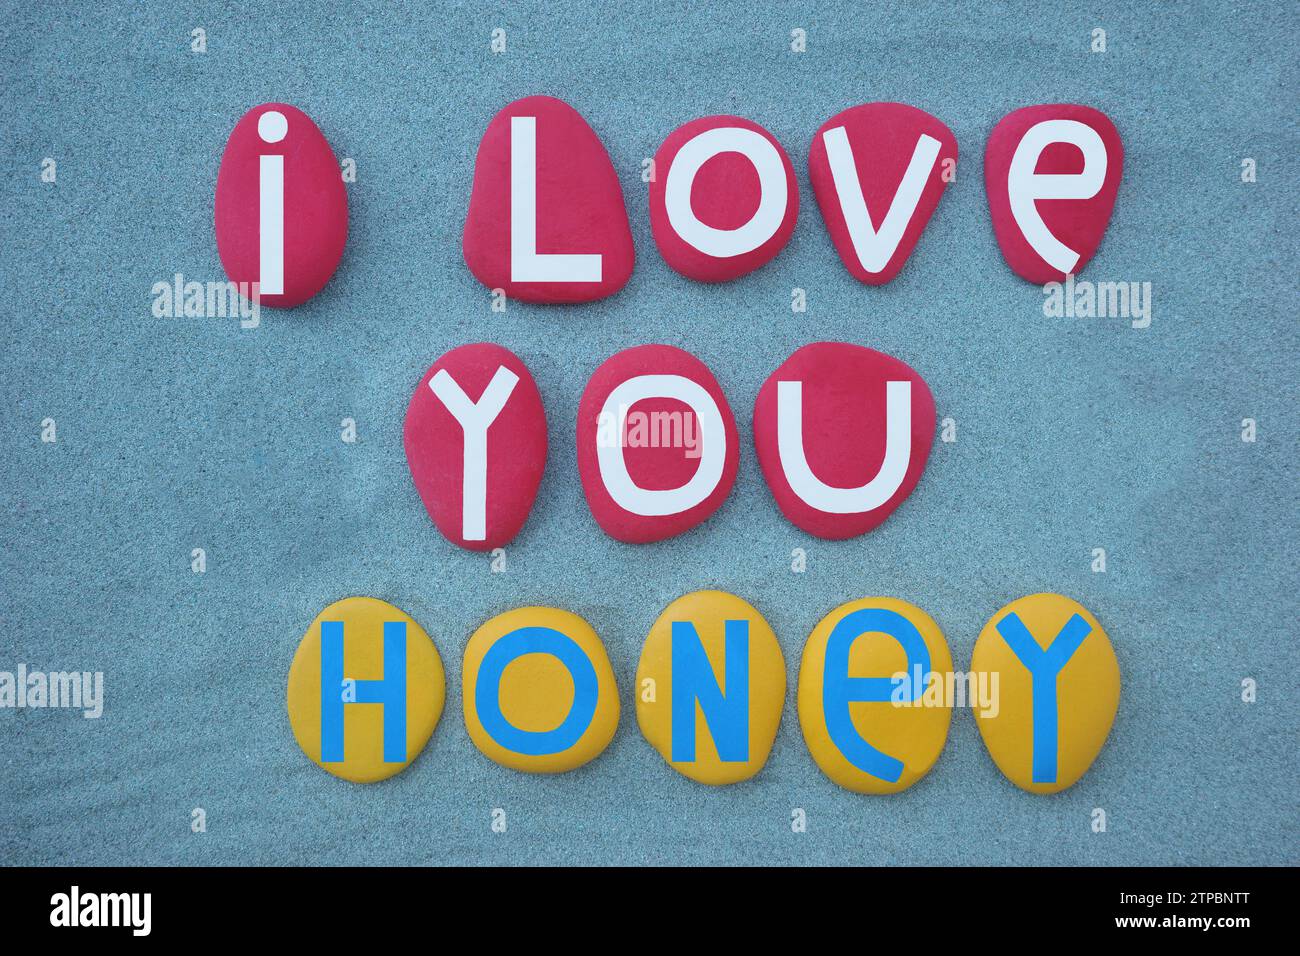 I love you honey, creative message composed with hand painted red and yellow stone letters over green sand Stock Photo